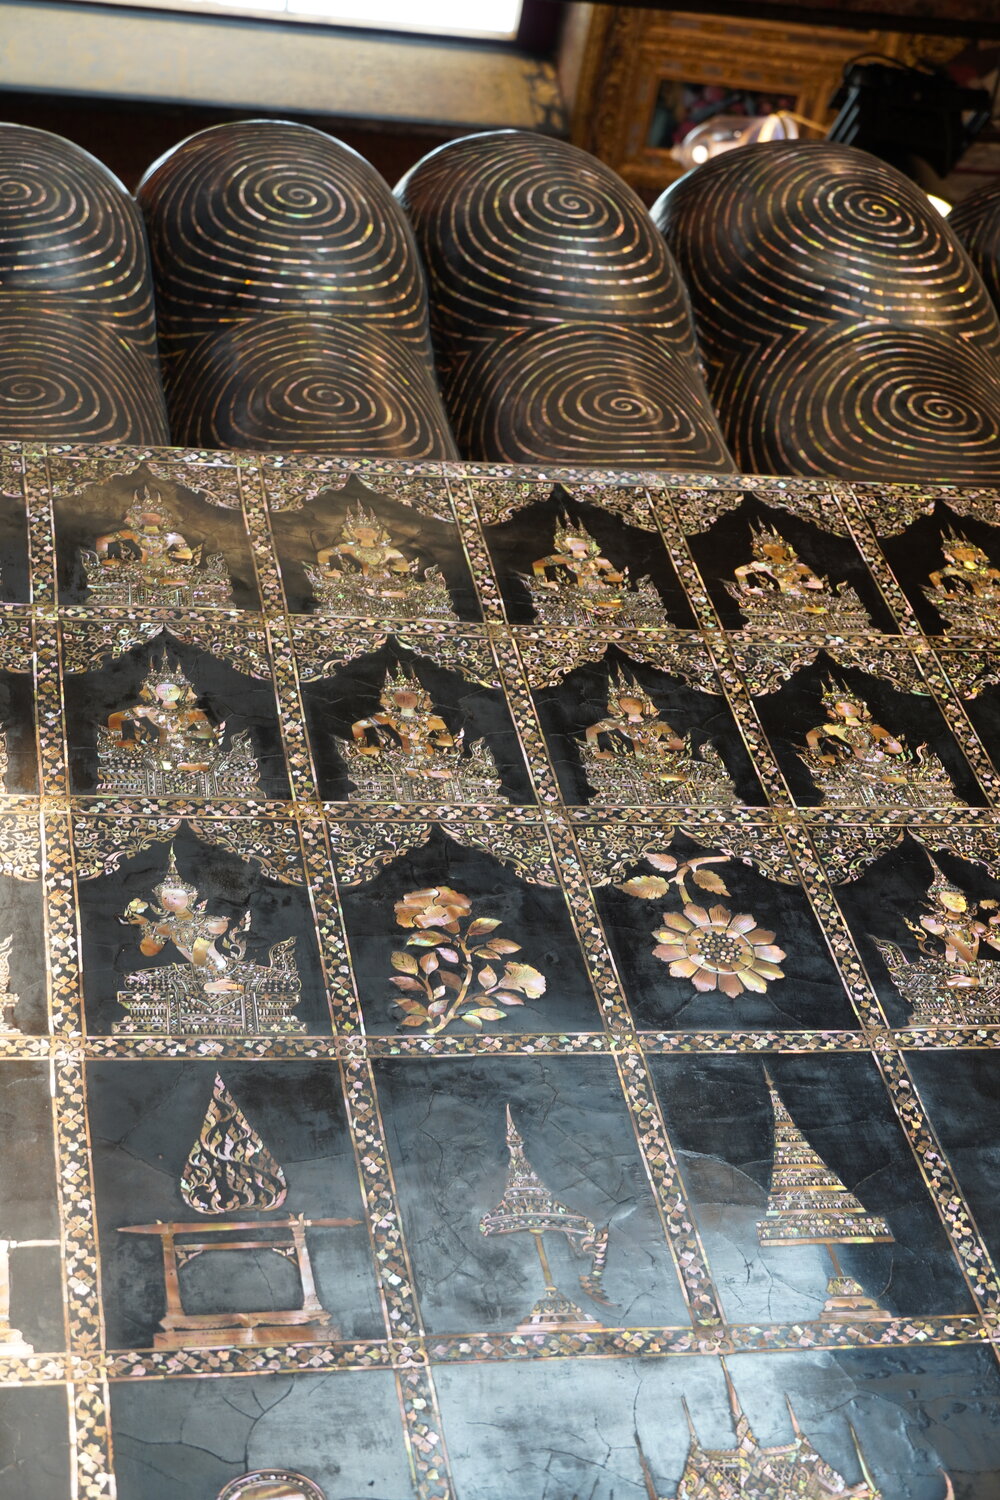 Mother of Pearl Decorated Feet of Buddha